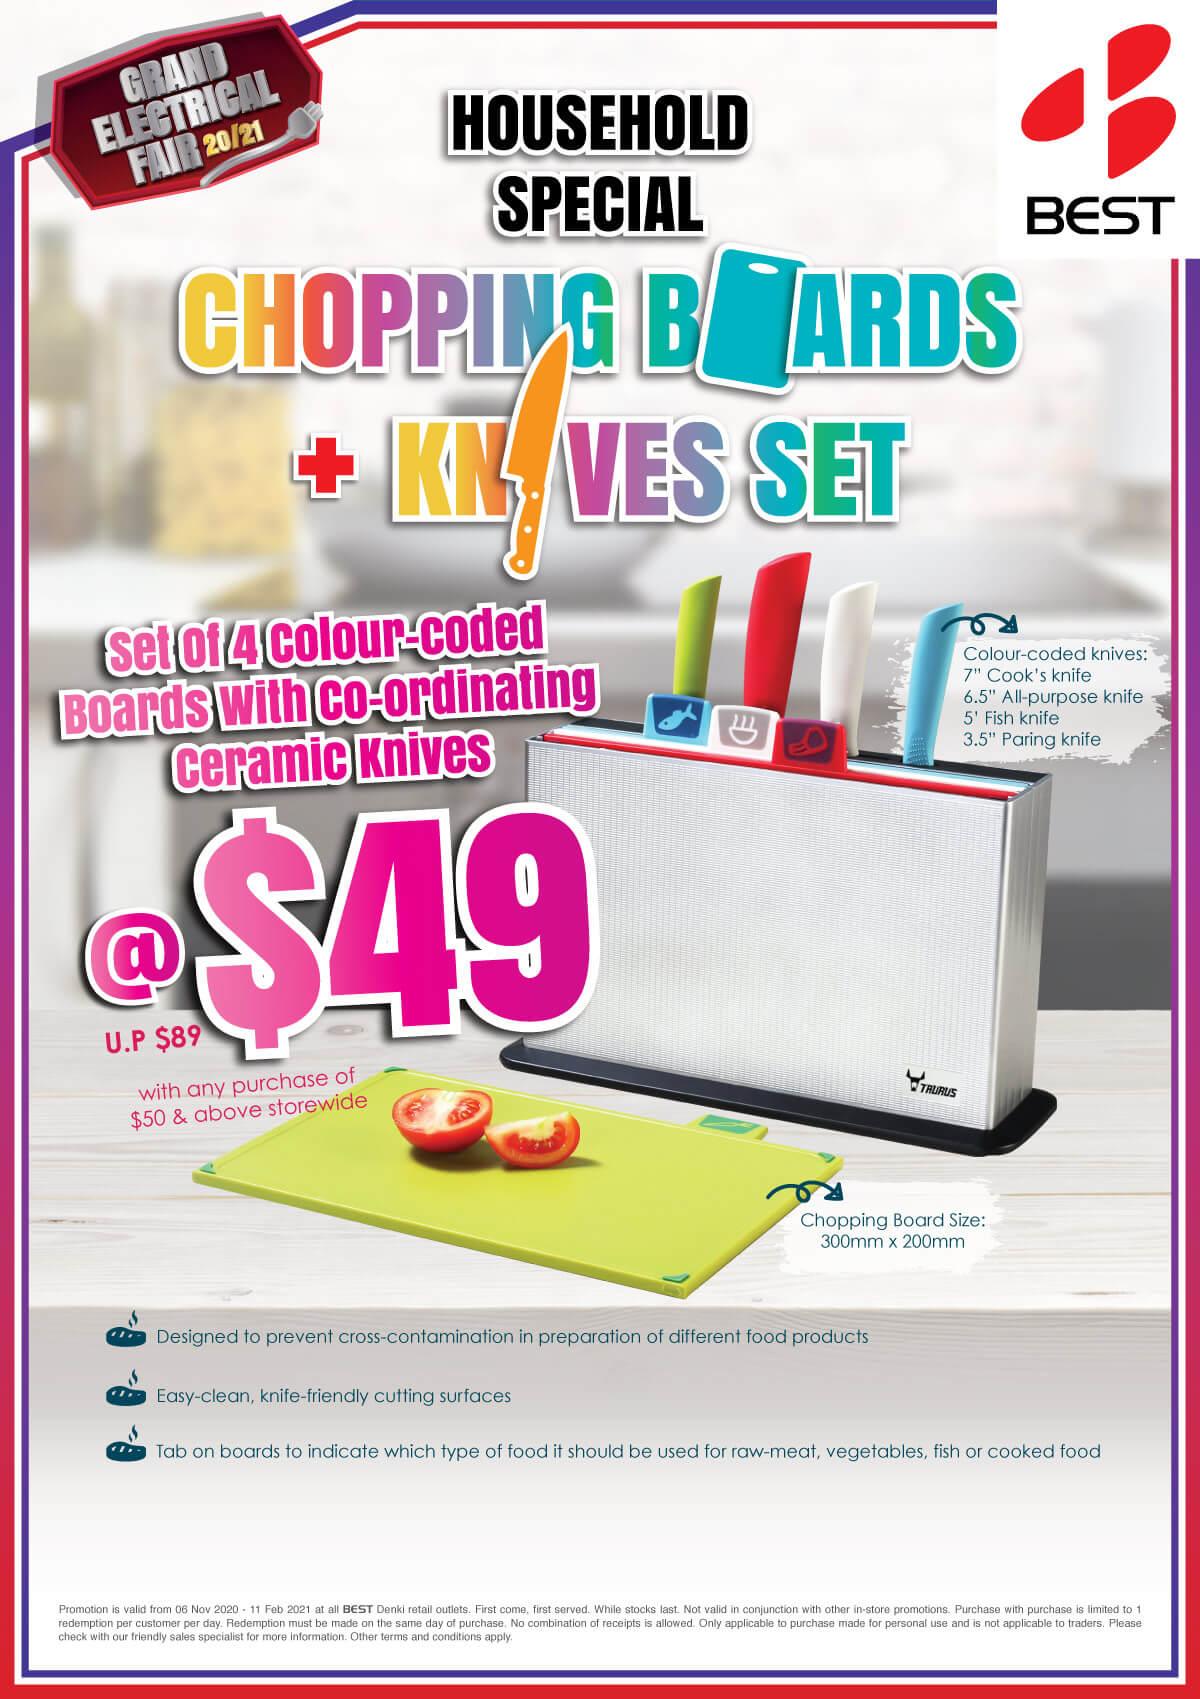 Best Denki Household Special Chopping Board and Knives Set at $49 with any purchase of $50 and above storewide